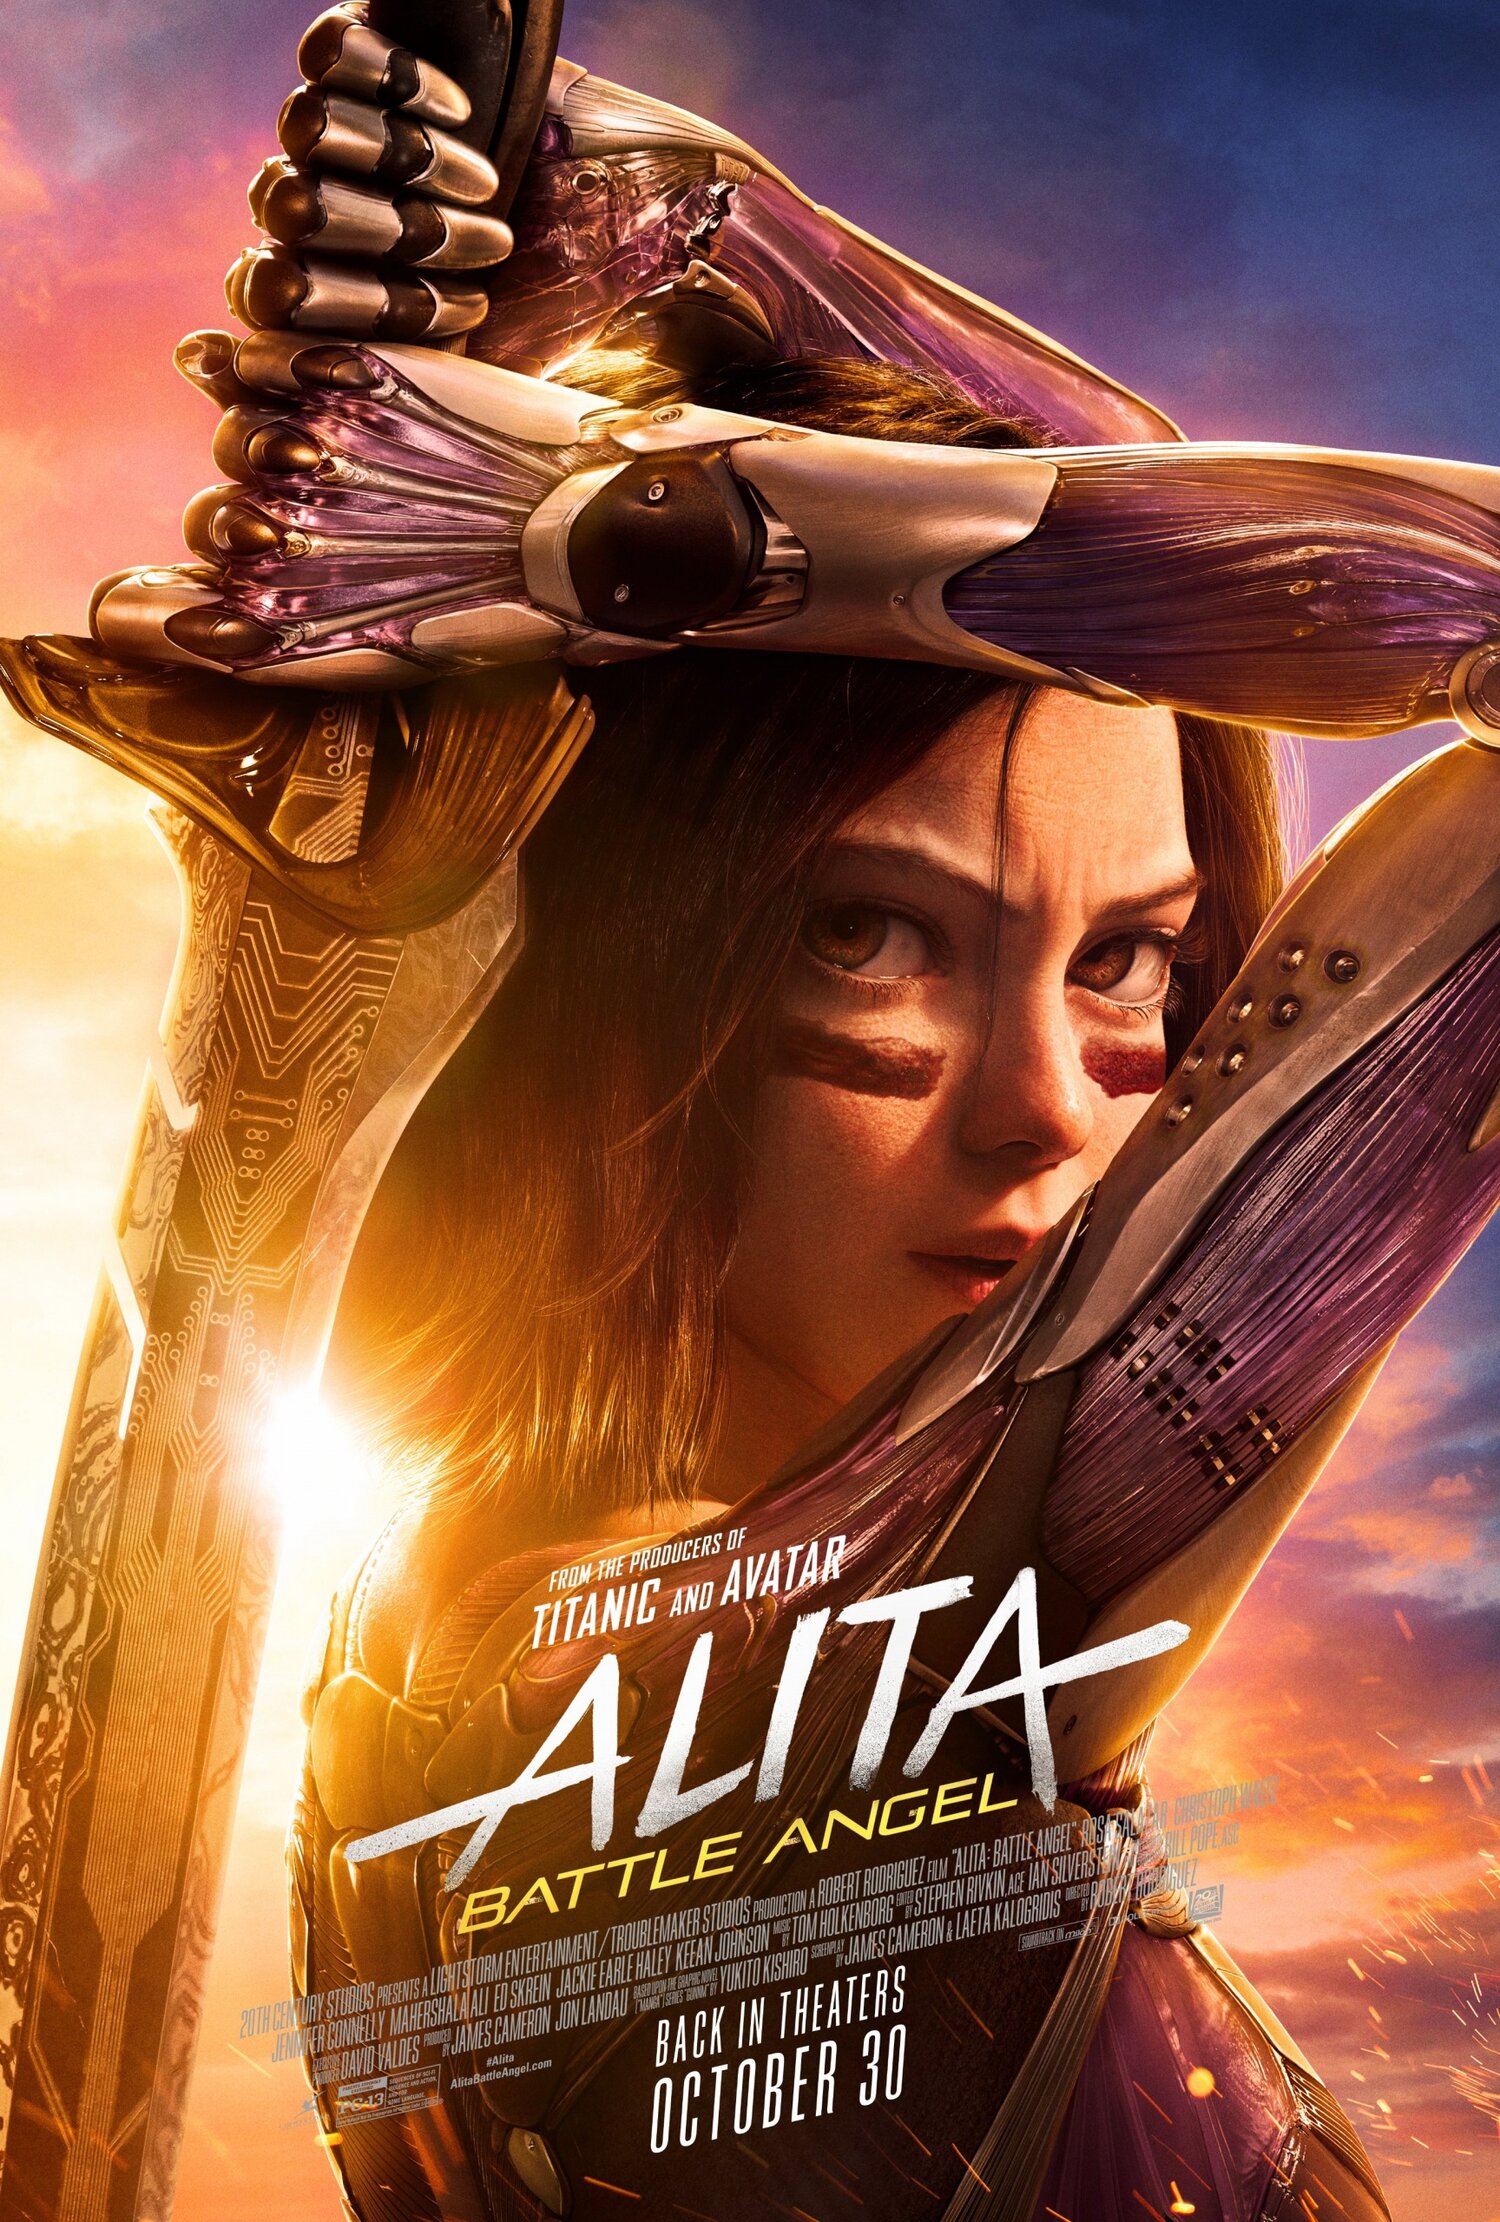 Why does Alita: Battle Angel have such a dedicated fanbase